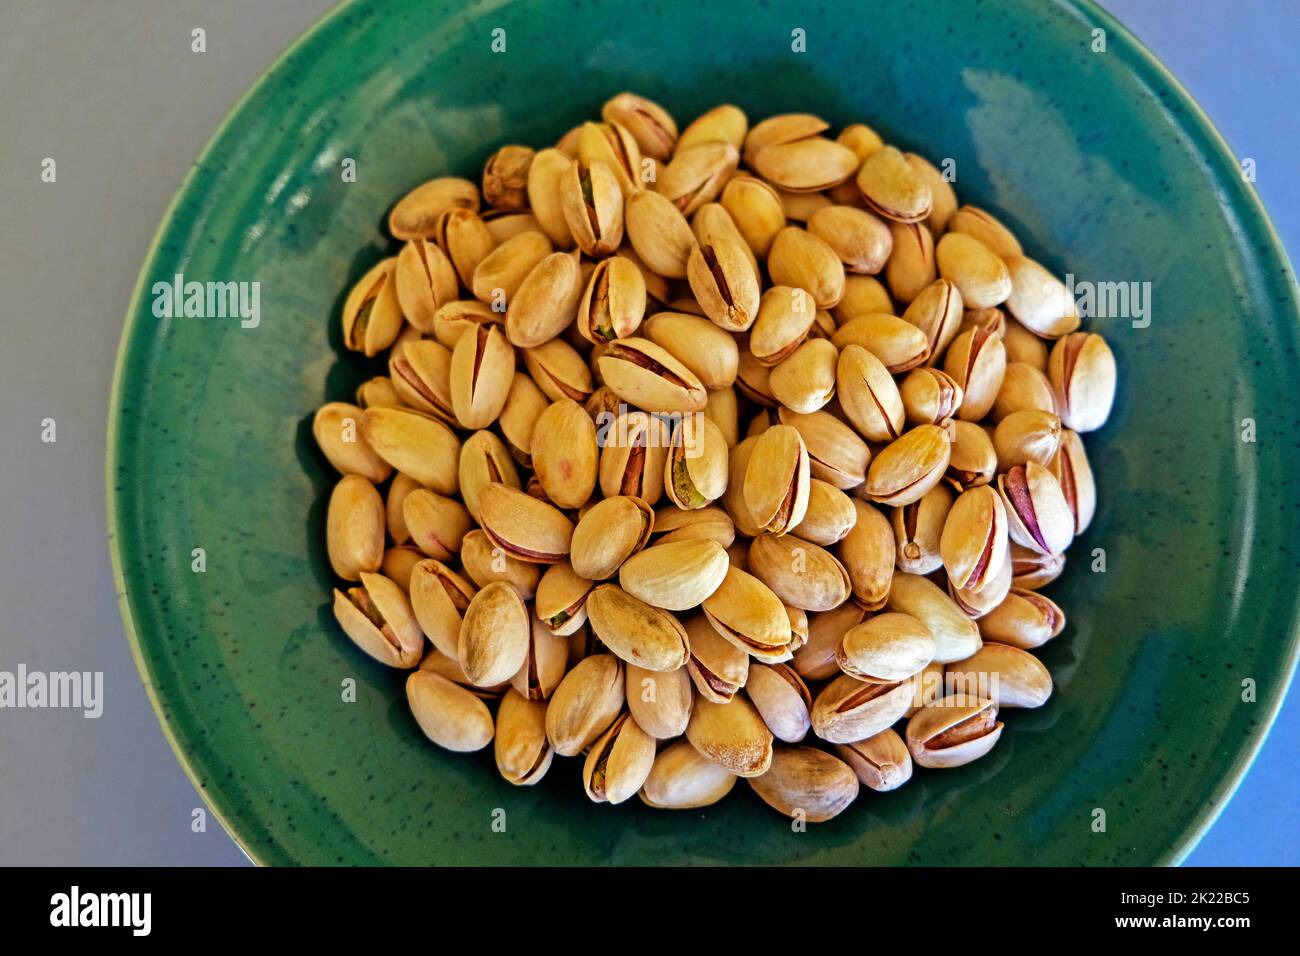 Pistachio nuts on a jade green plate Stock Photo